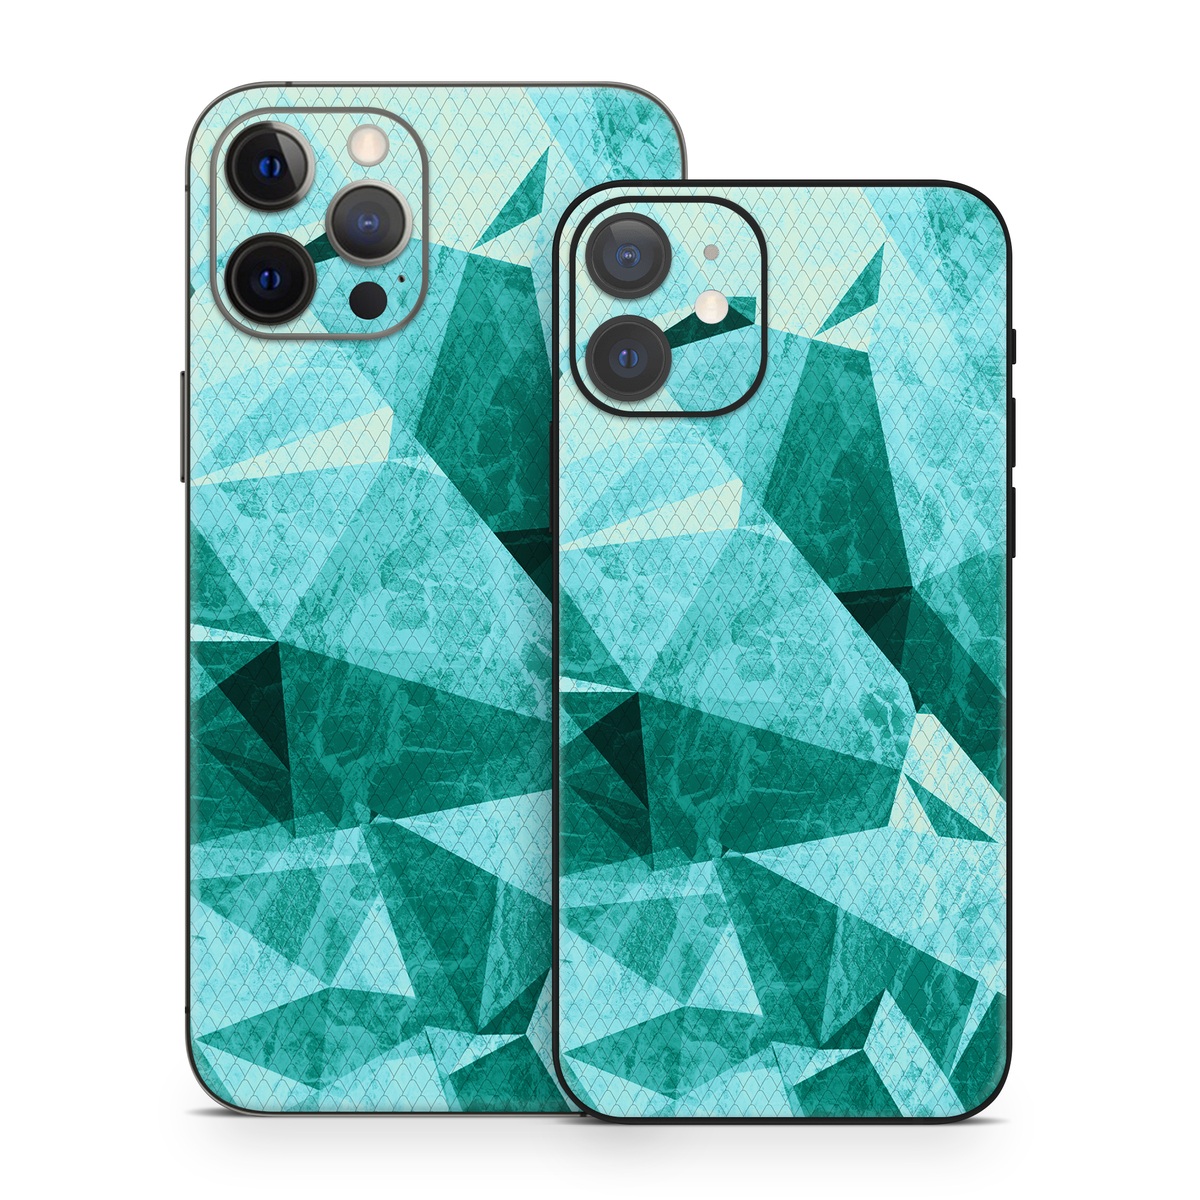 iPhone 12 Series Skin design of Aqua, Blue, Pattern, Turquoise, Illustration, Teal, Design, Line, Graphic design, with blue colors